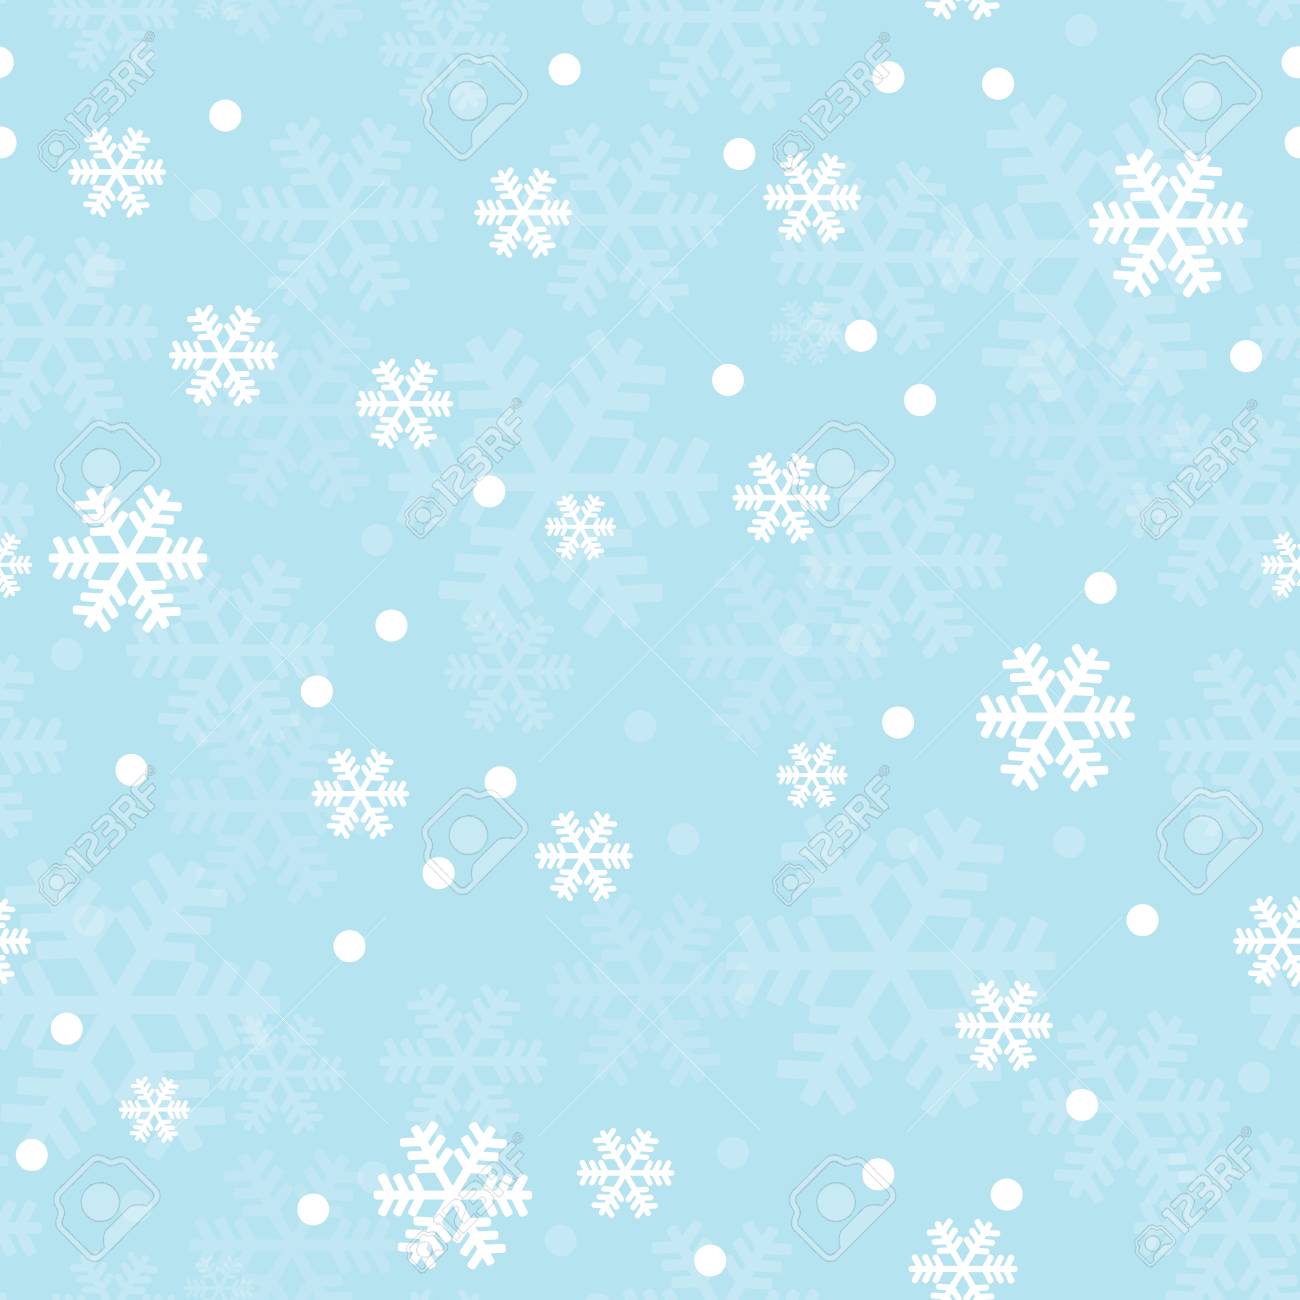 Blue Christmas Snowflakes Seamless Pattern Great For Winter